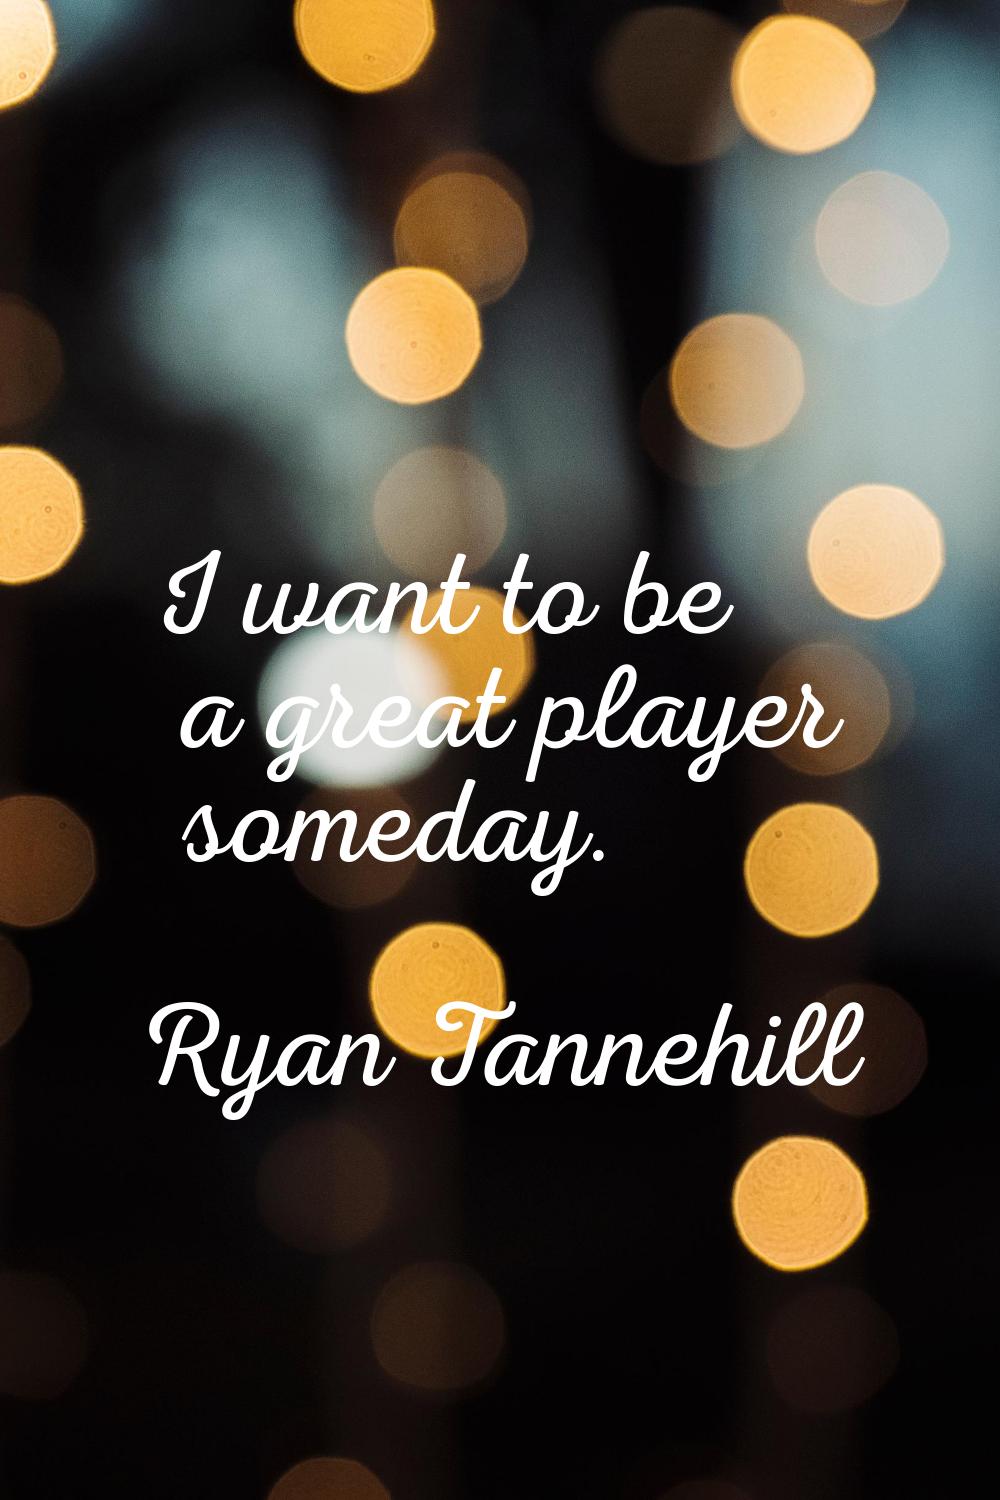 I want to be a great player someday.